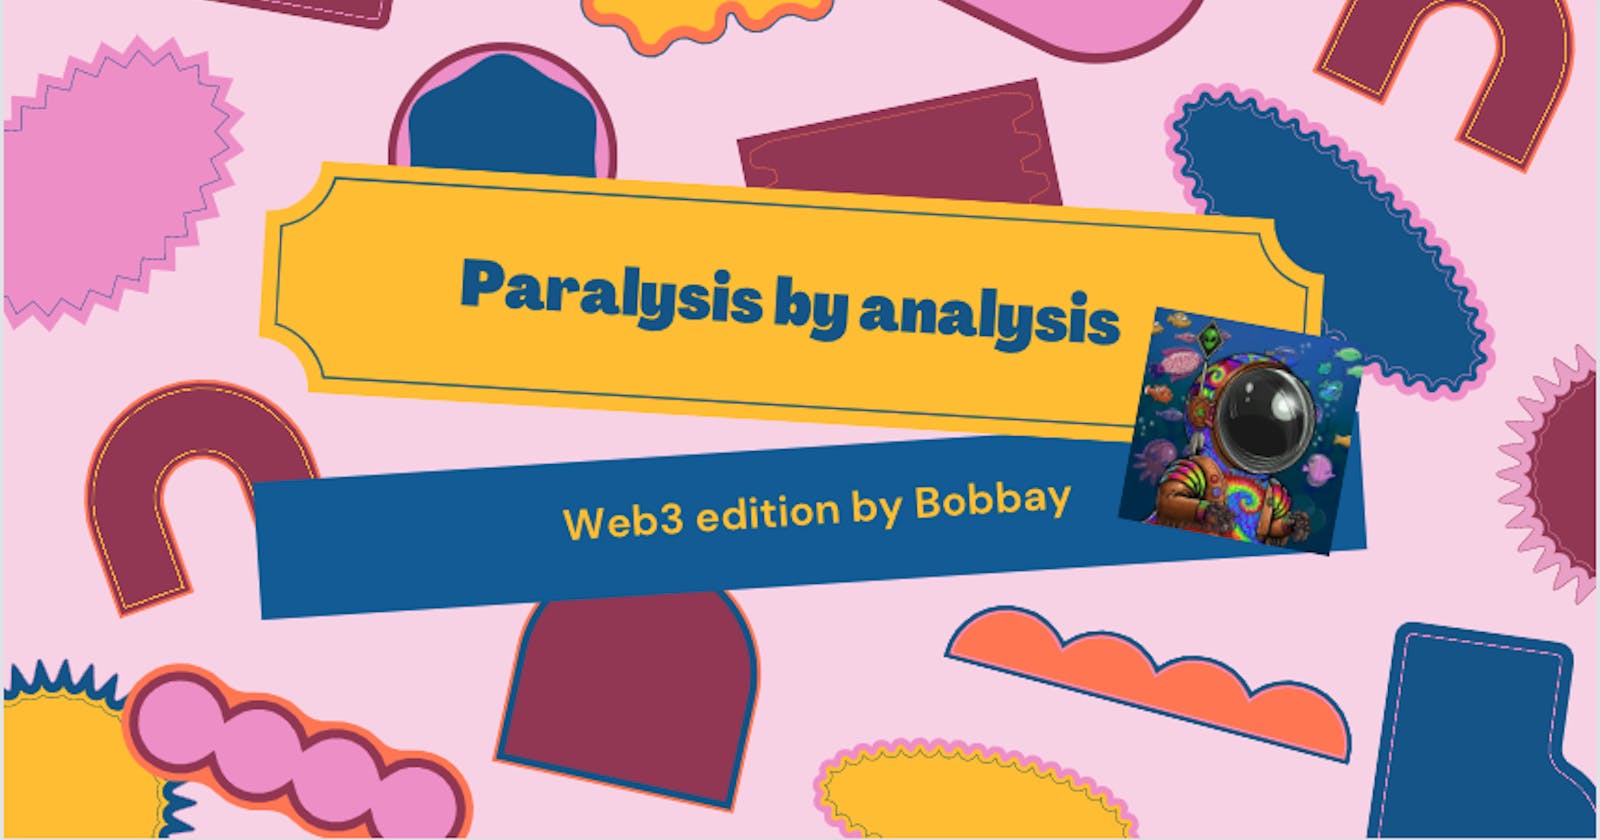 Paralysis by analysis - Web3 edition.